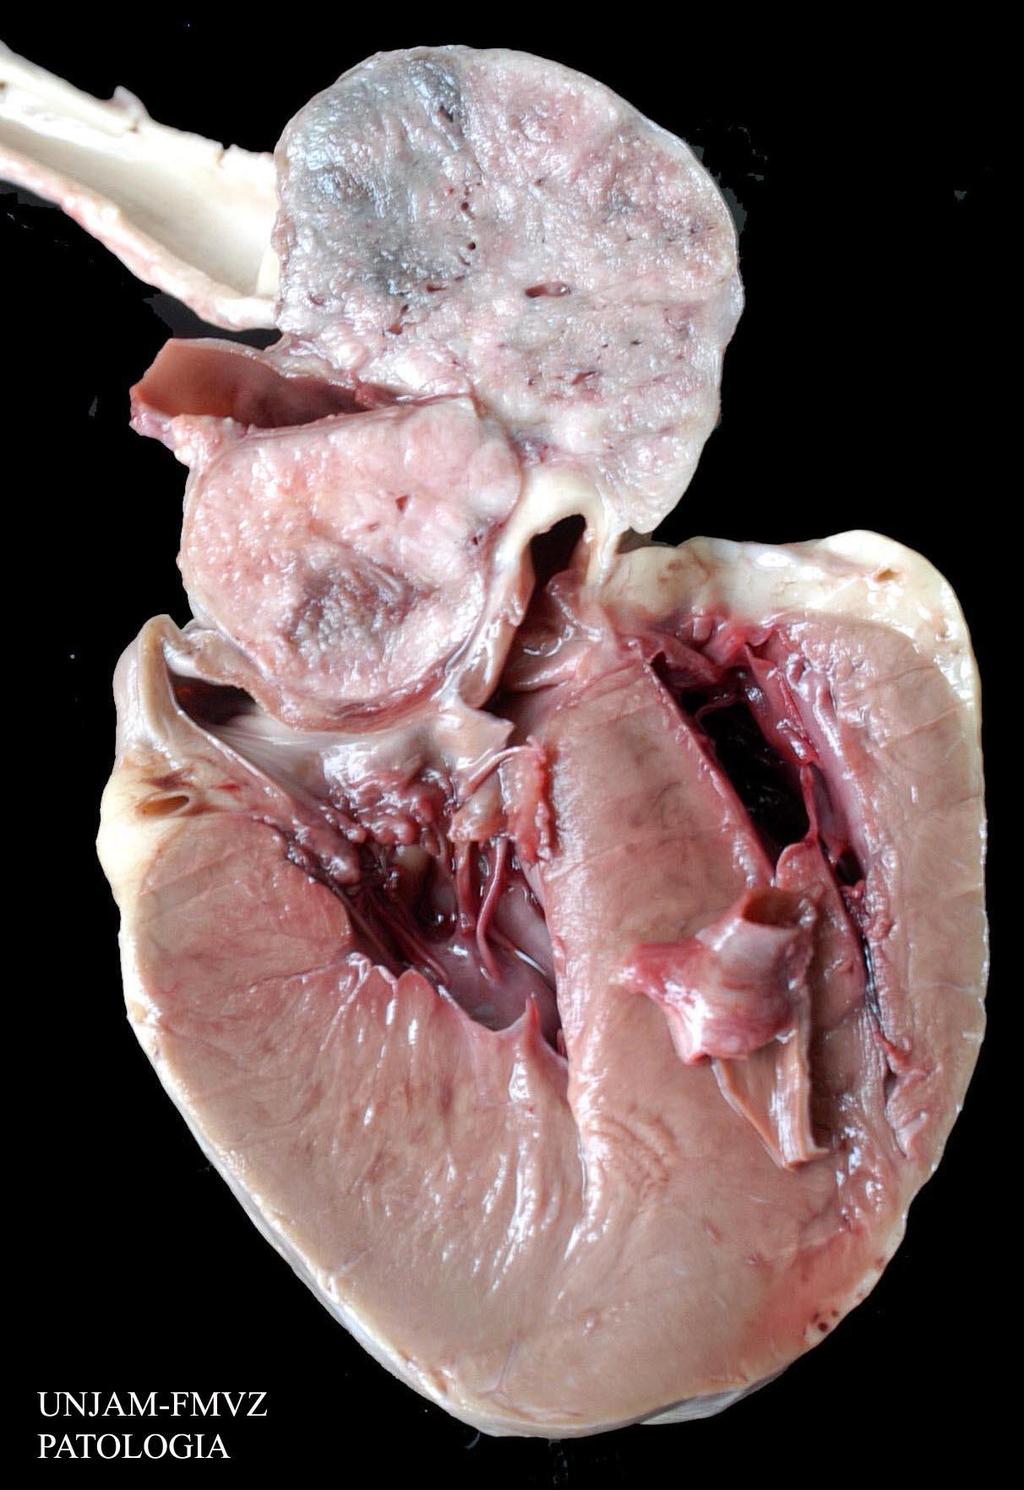 TUMOURS OF THE CARDIOVASCULAR SYSTEM Chemodectoma (Paraganglioma) Tumour of the chemoreceptors Aortic body tumour Carotid body tumour Usually benign Typically non-functional Carotid body tumours